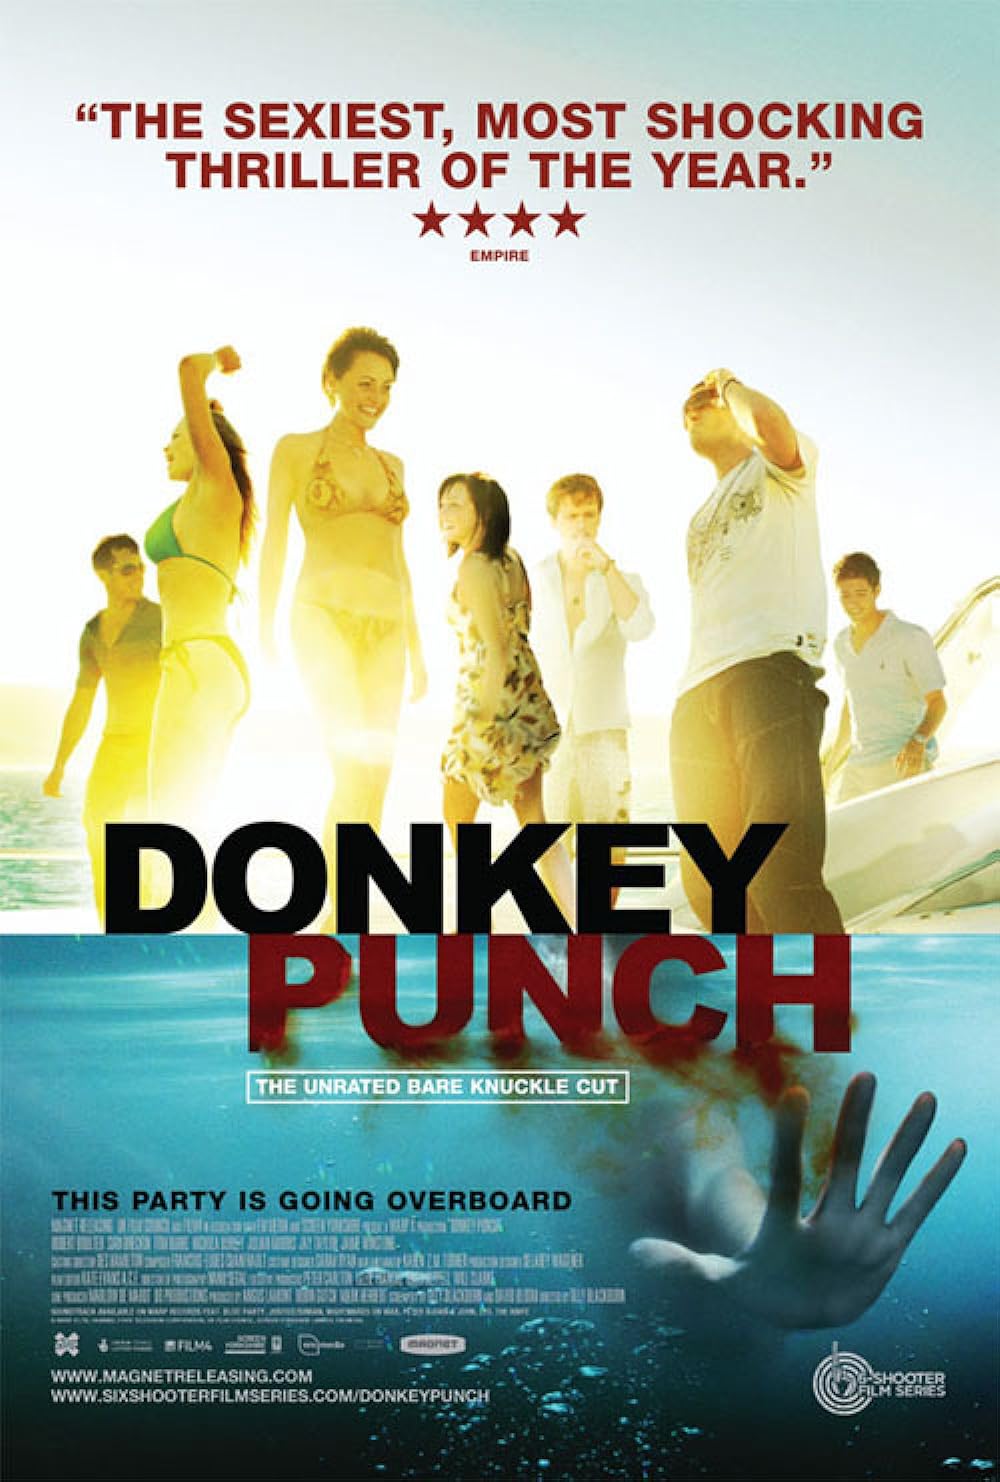 barbara rideout recommends donkey punch during sex pic